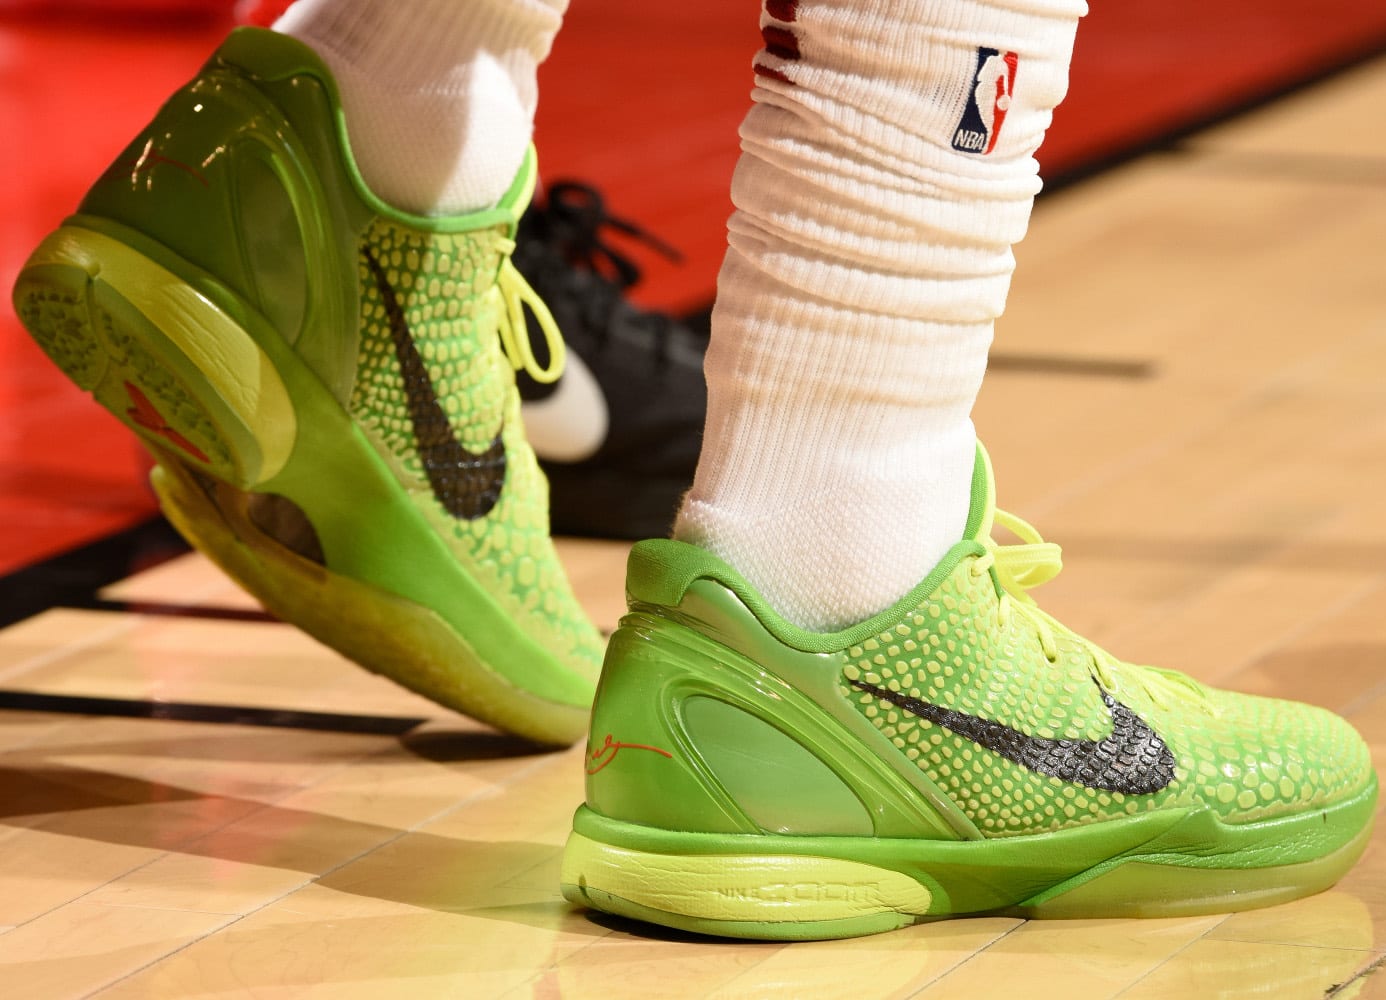 NBA loosens color restrictions on sneakers - ESPN